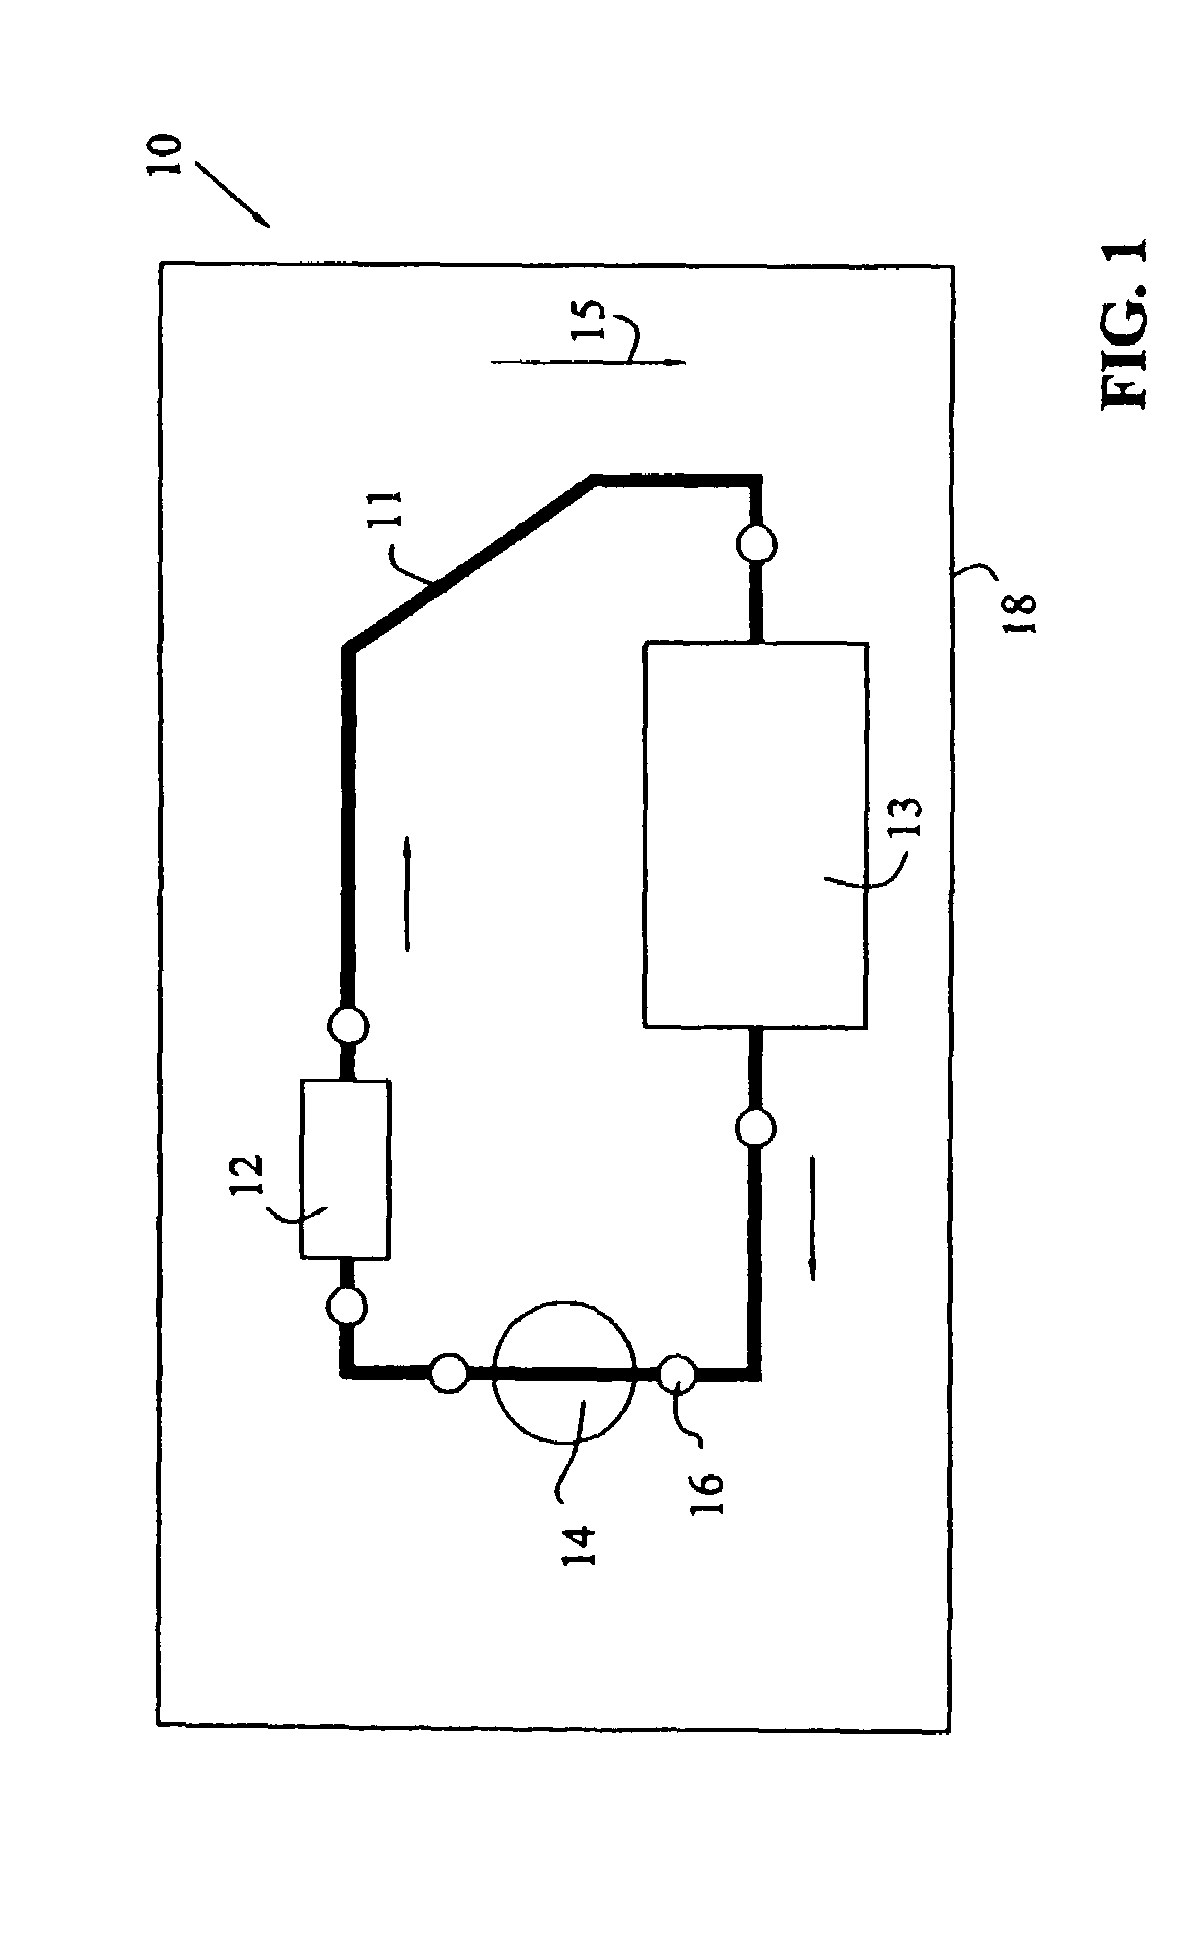 Integrated cooling system for electronic devices